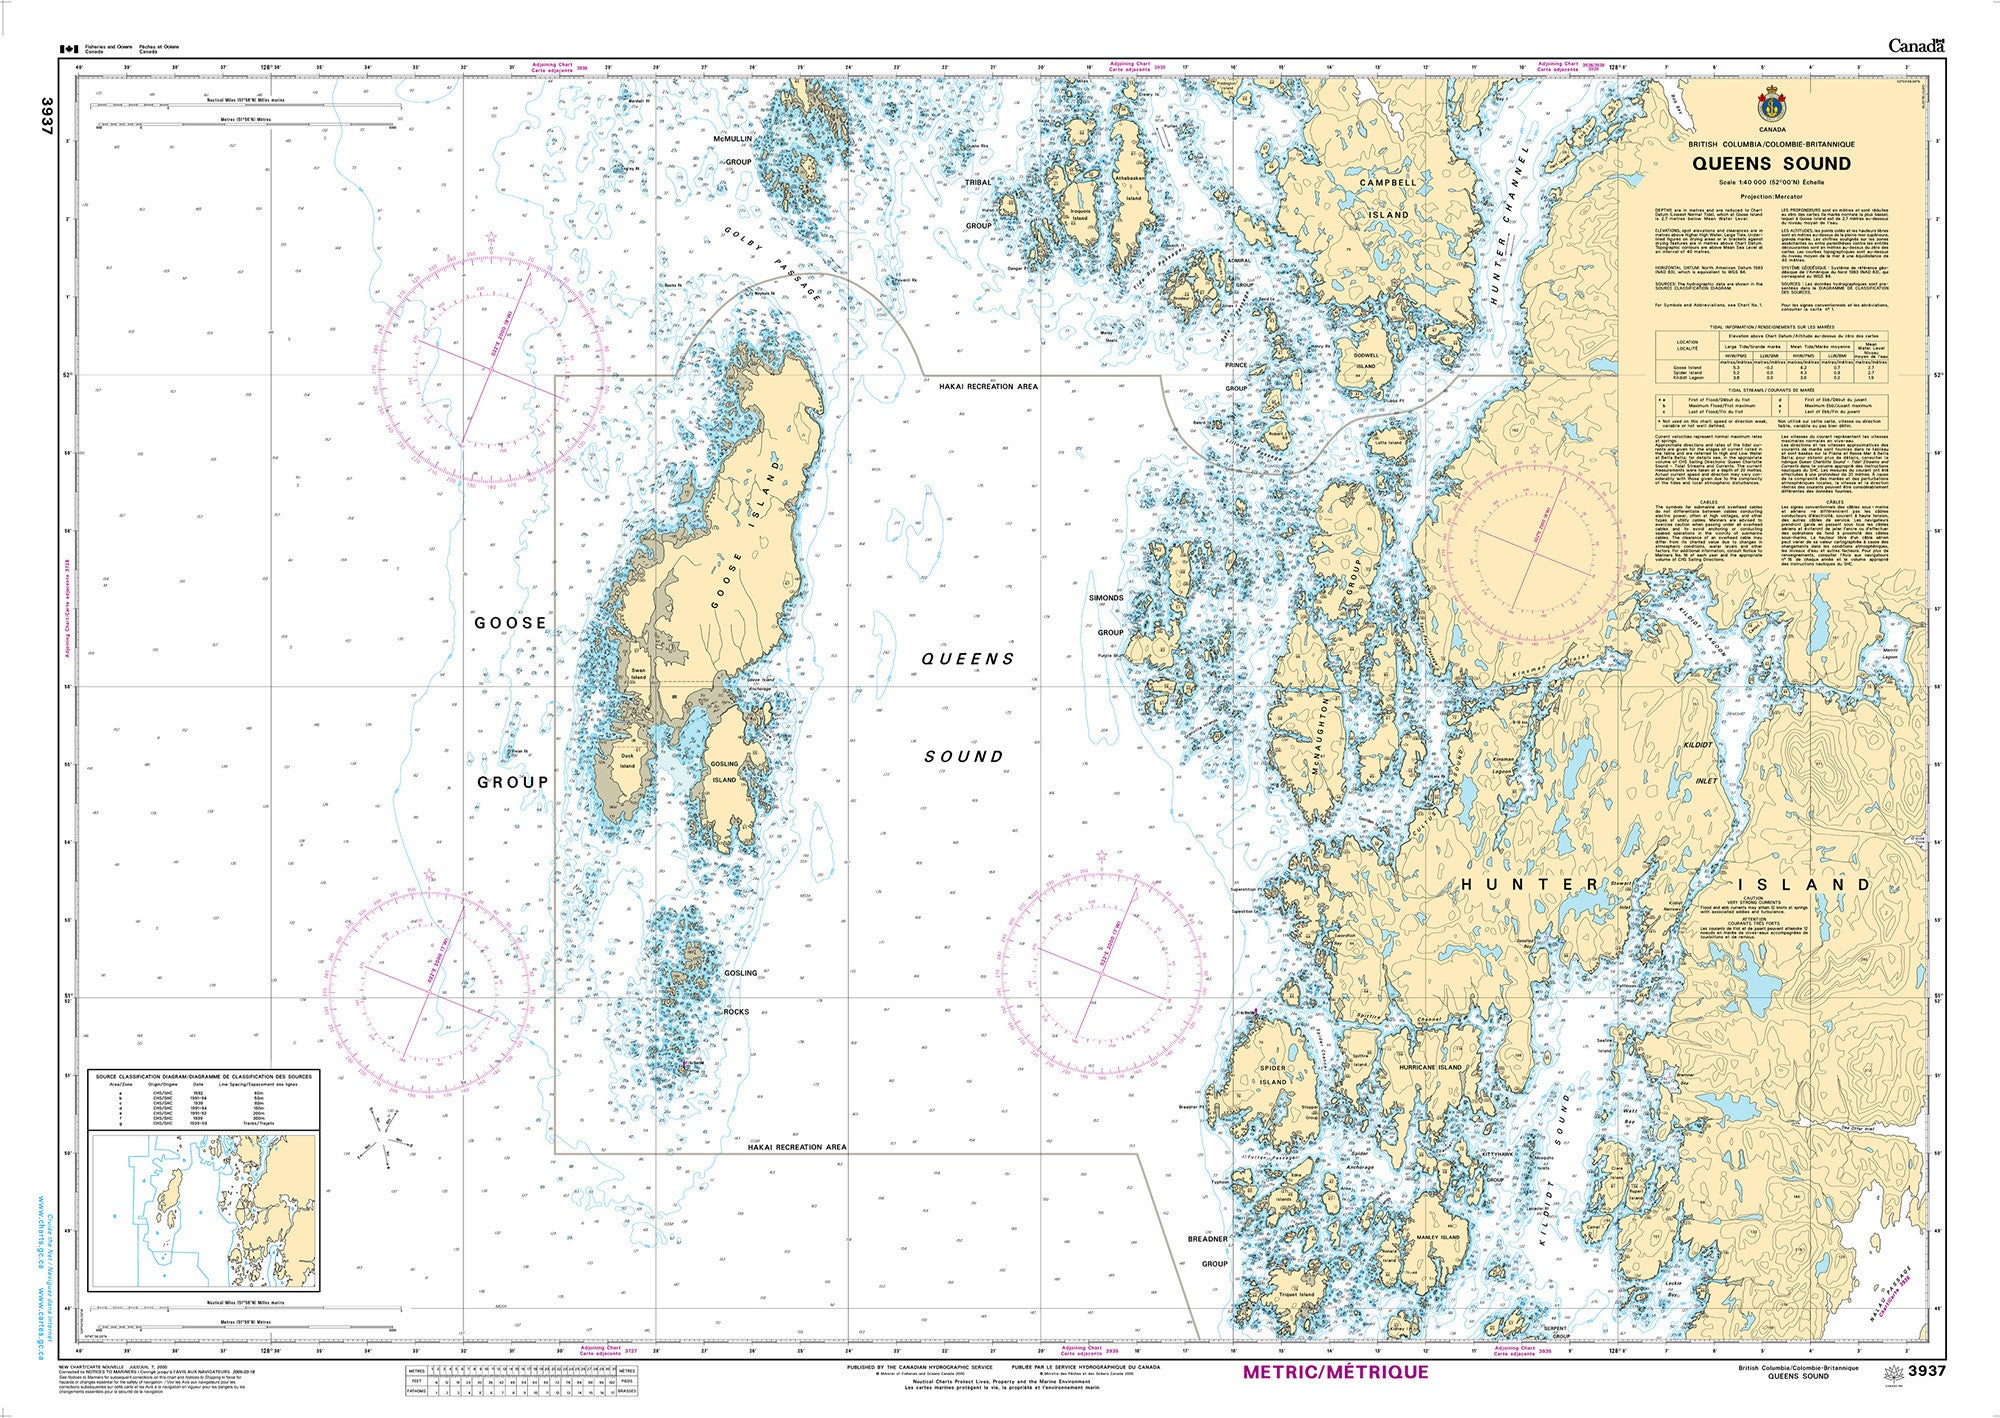 Canadian Hydrographic Service Nautical Chart CHS3937: Queens Sound